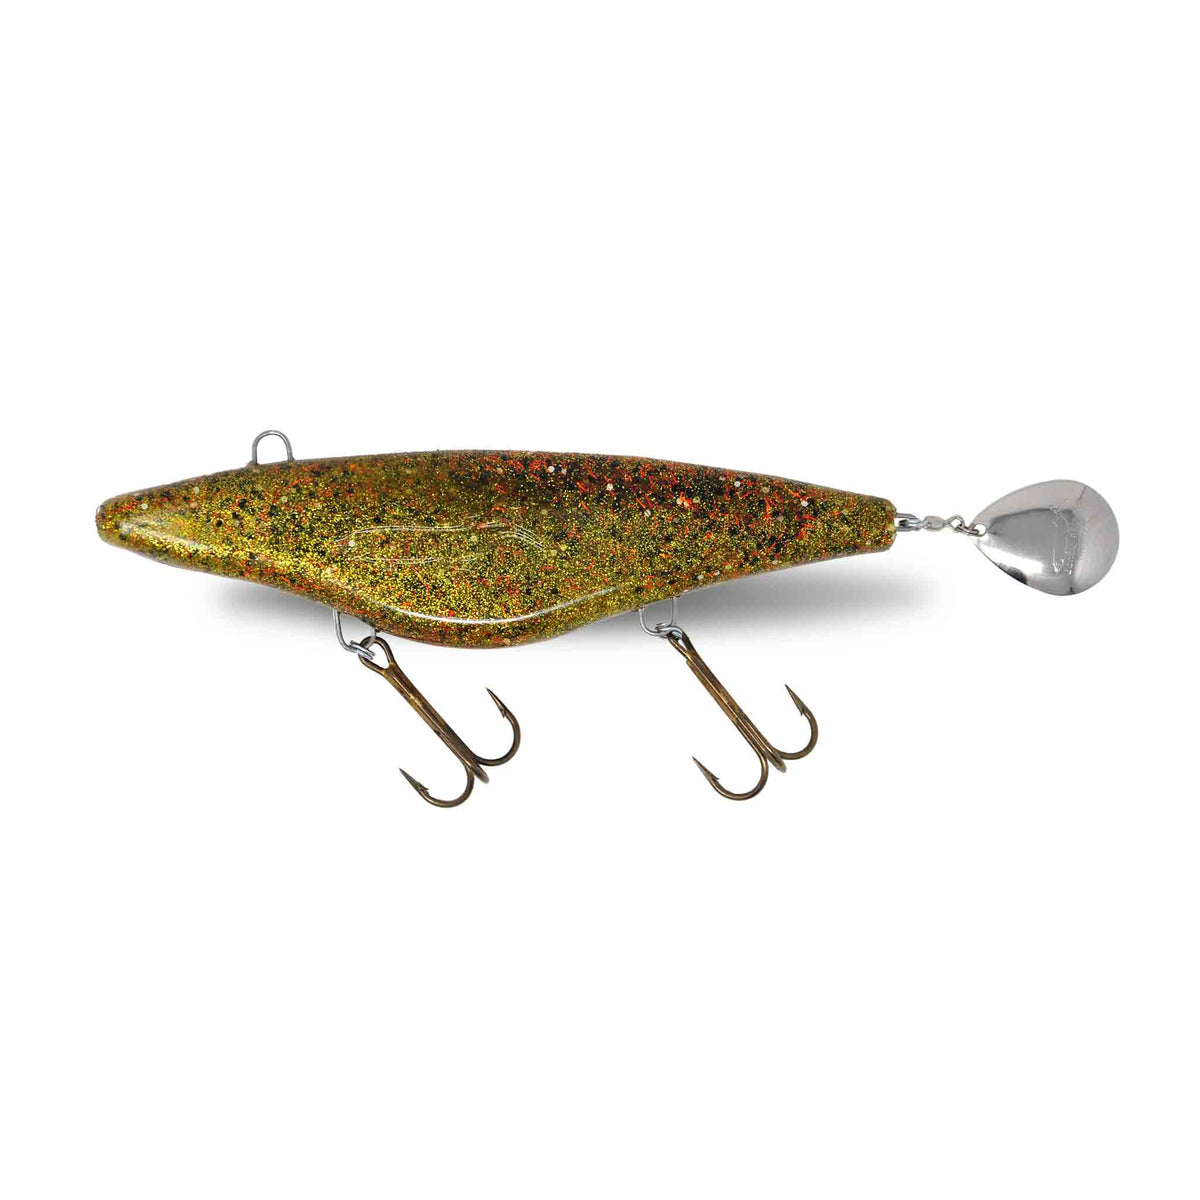 View of Bondy Bait Co. Bondy Wobbler Vomit Shad available at EZOKO Pike and Musky Shop